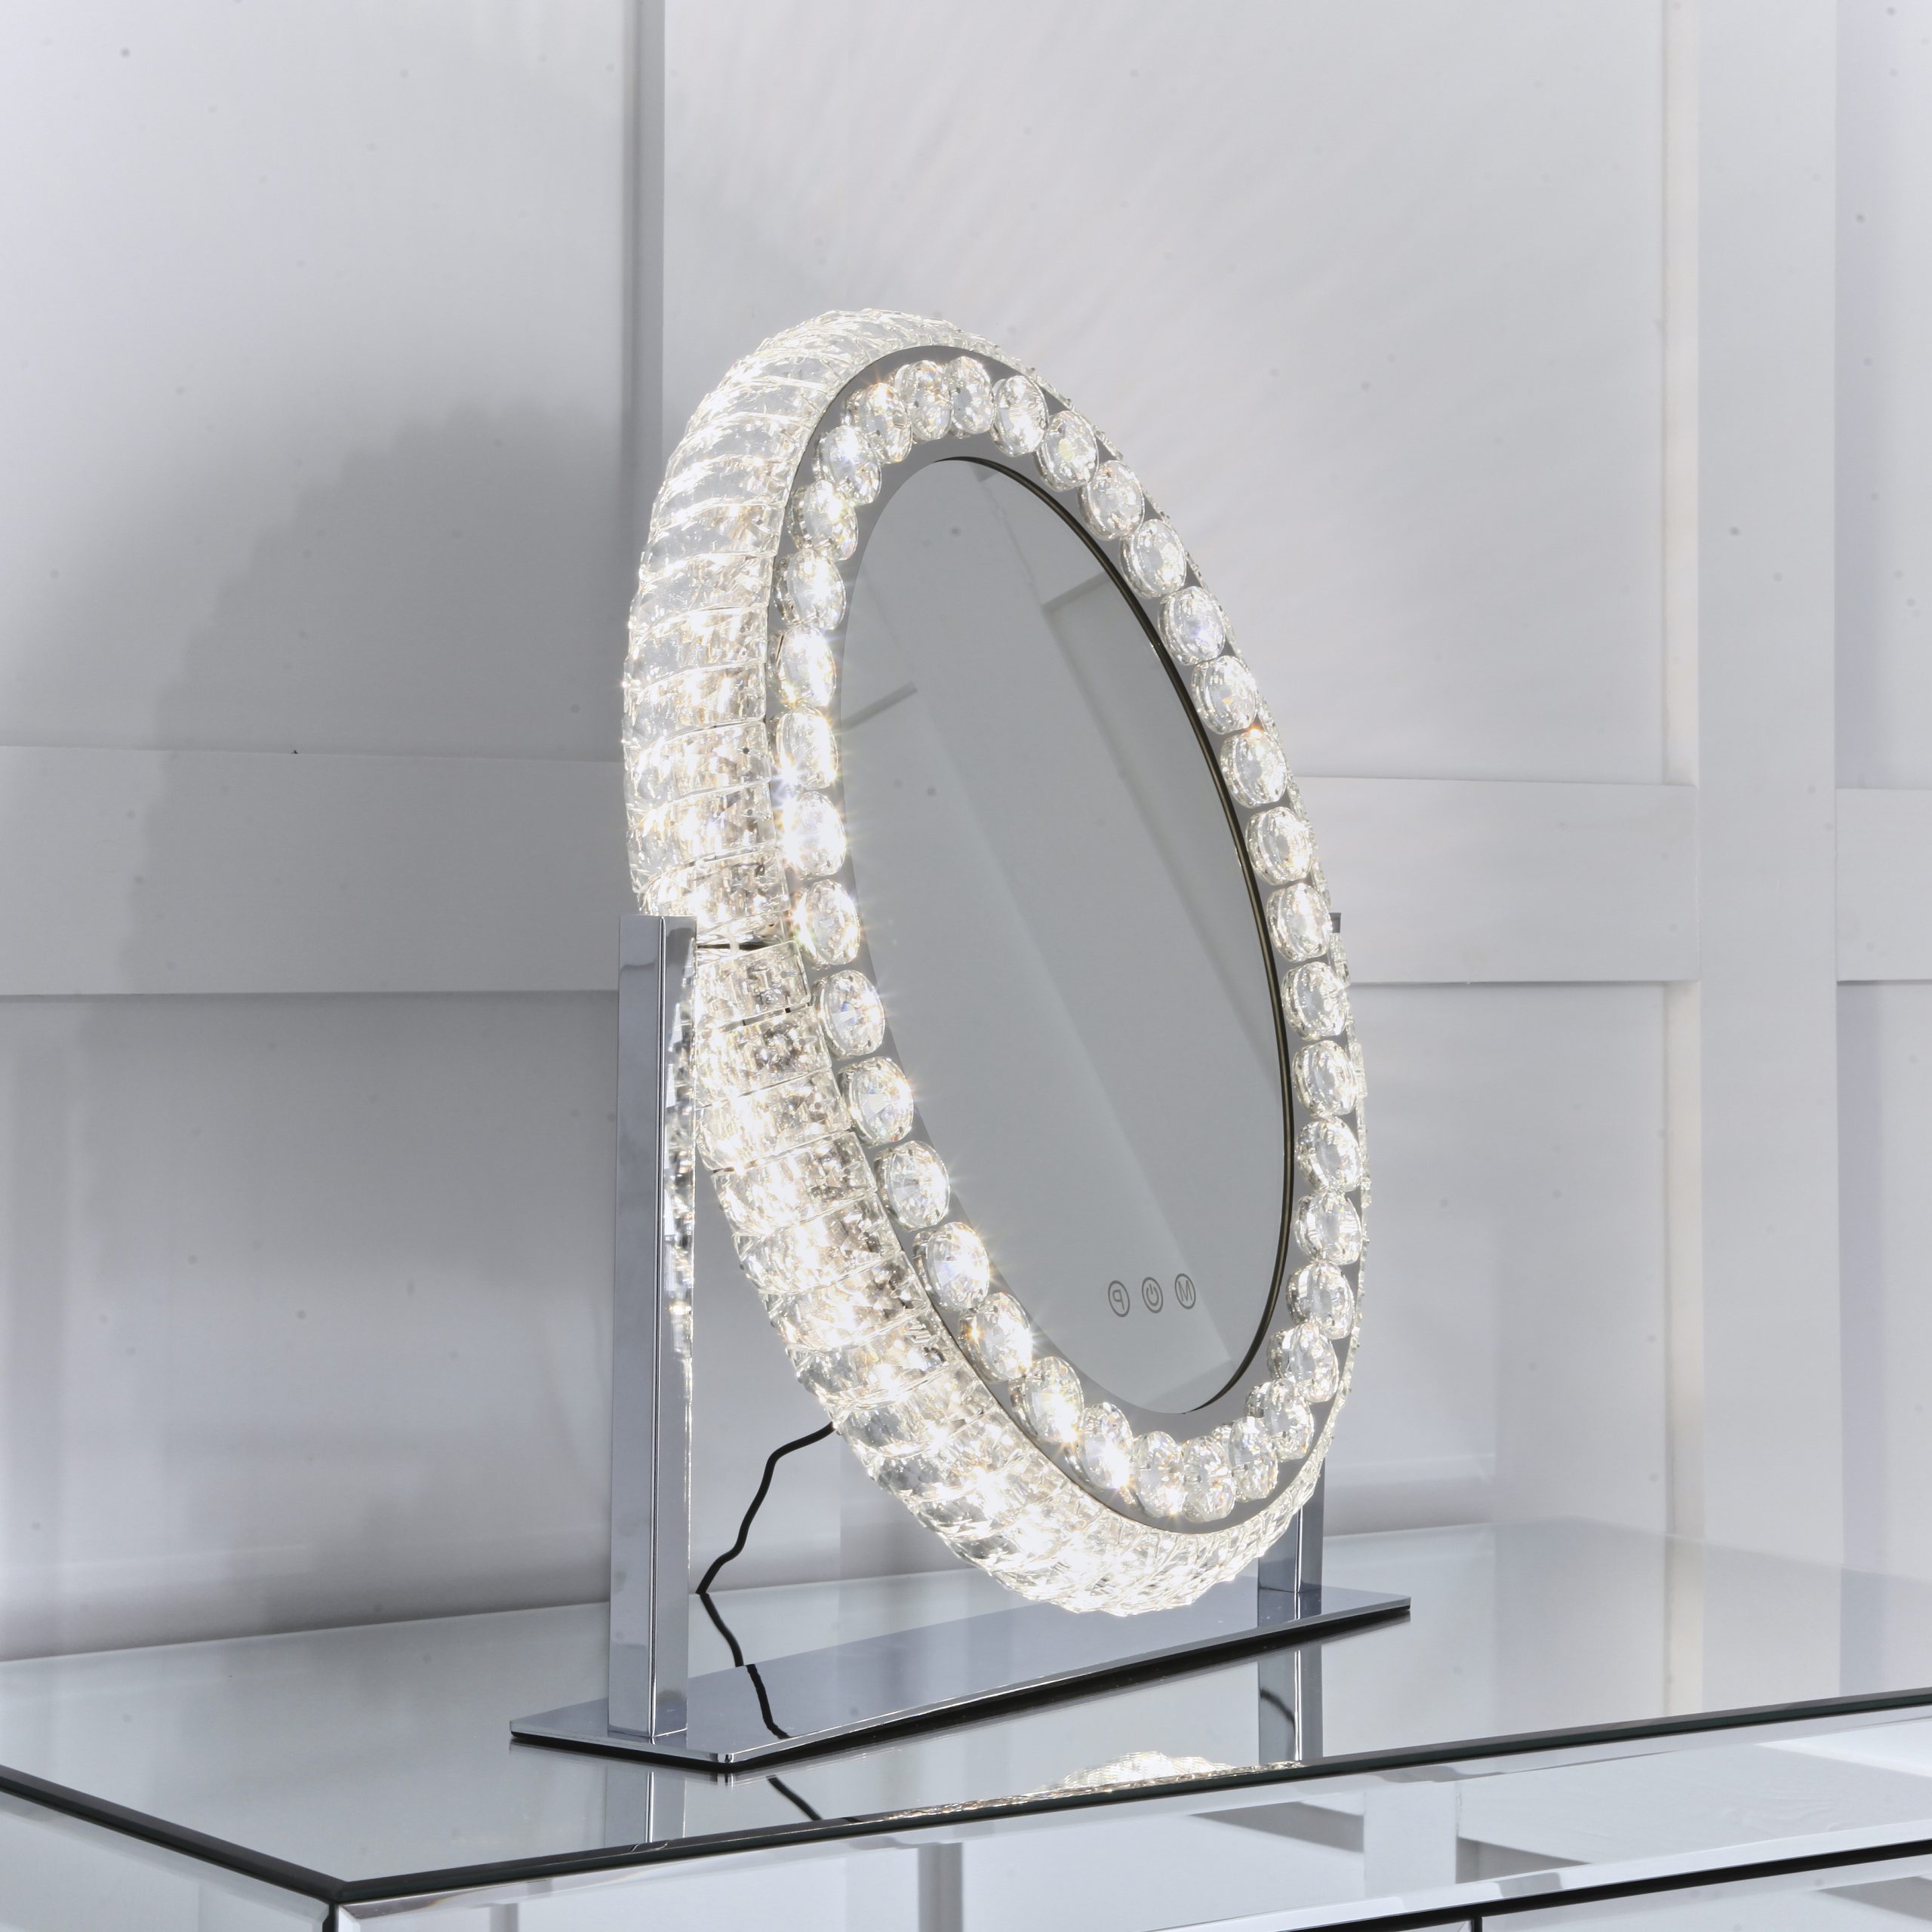 NICHES Hollywood Makeup Mirror Oval Decorative Crystal Dimmable 3 Settings Vanity Hollywood LED Mirror 